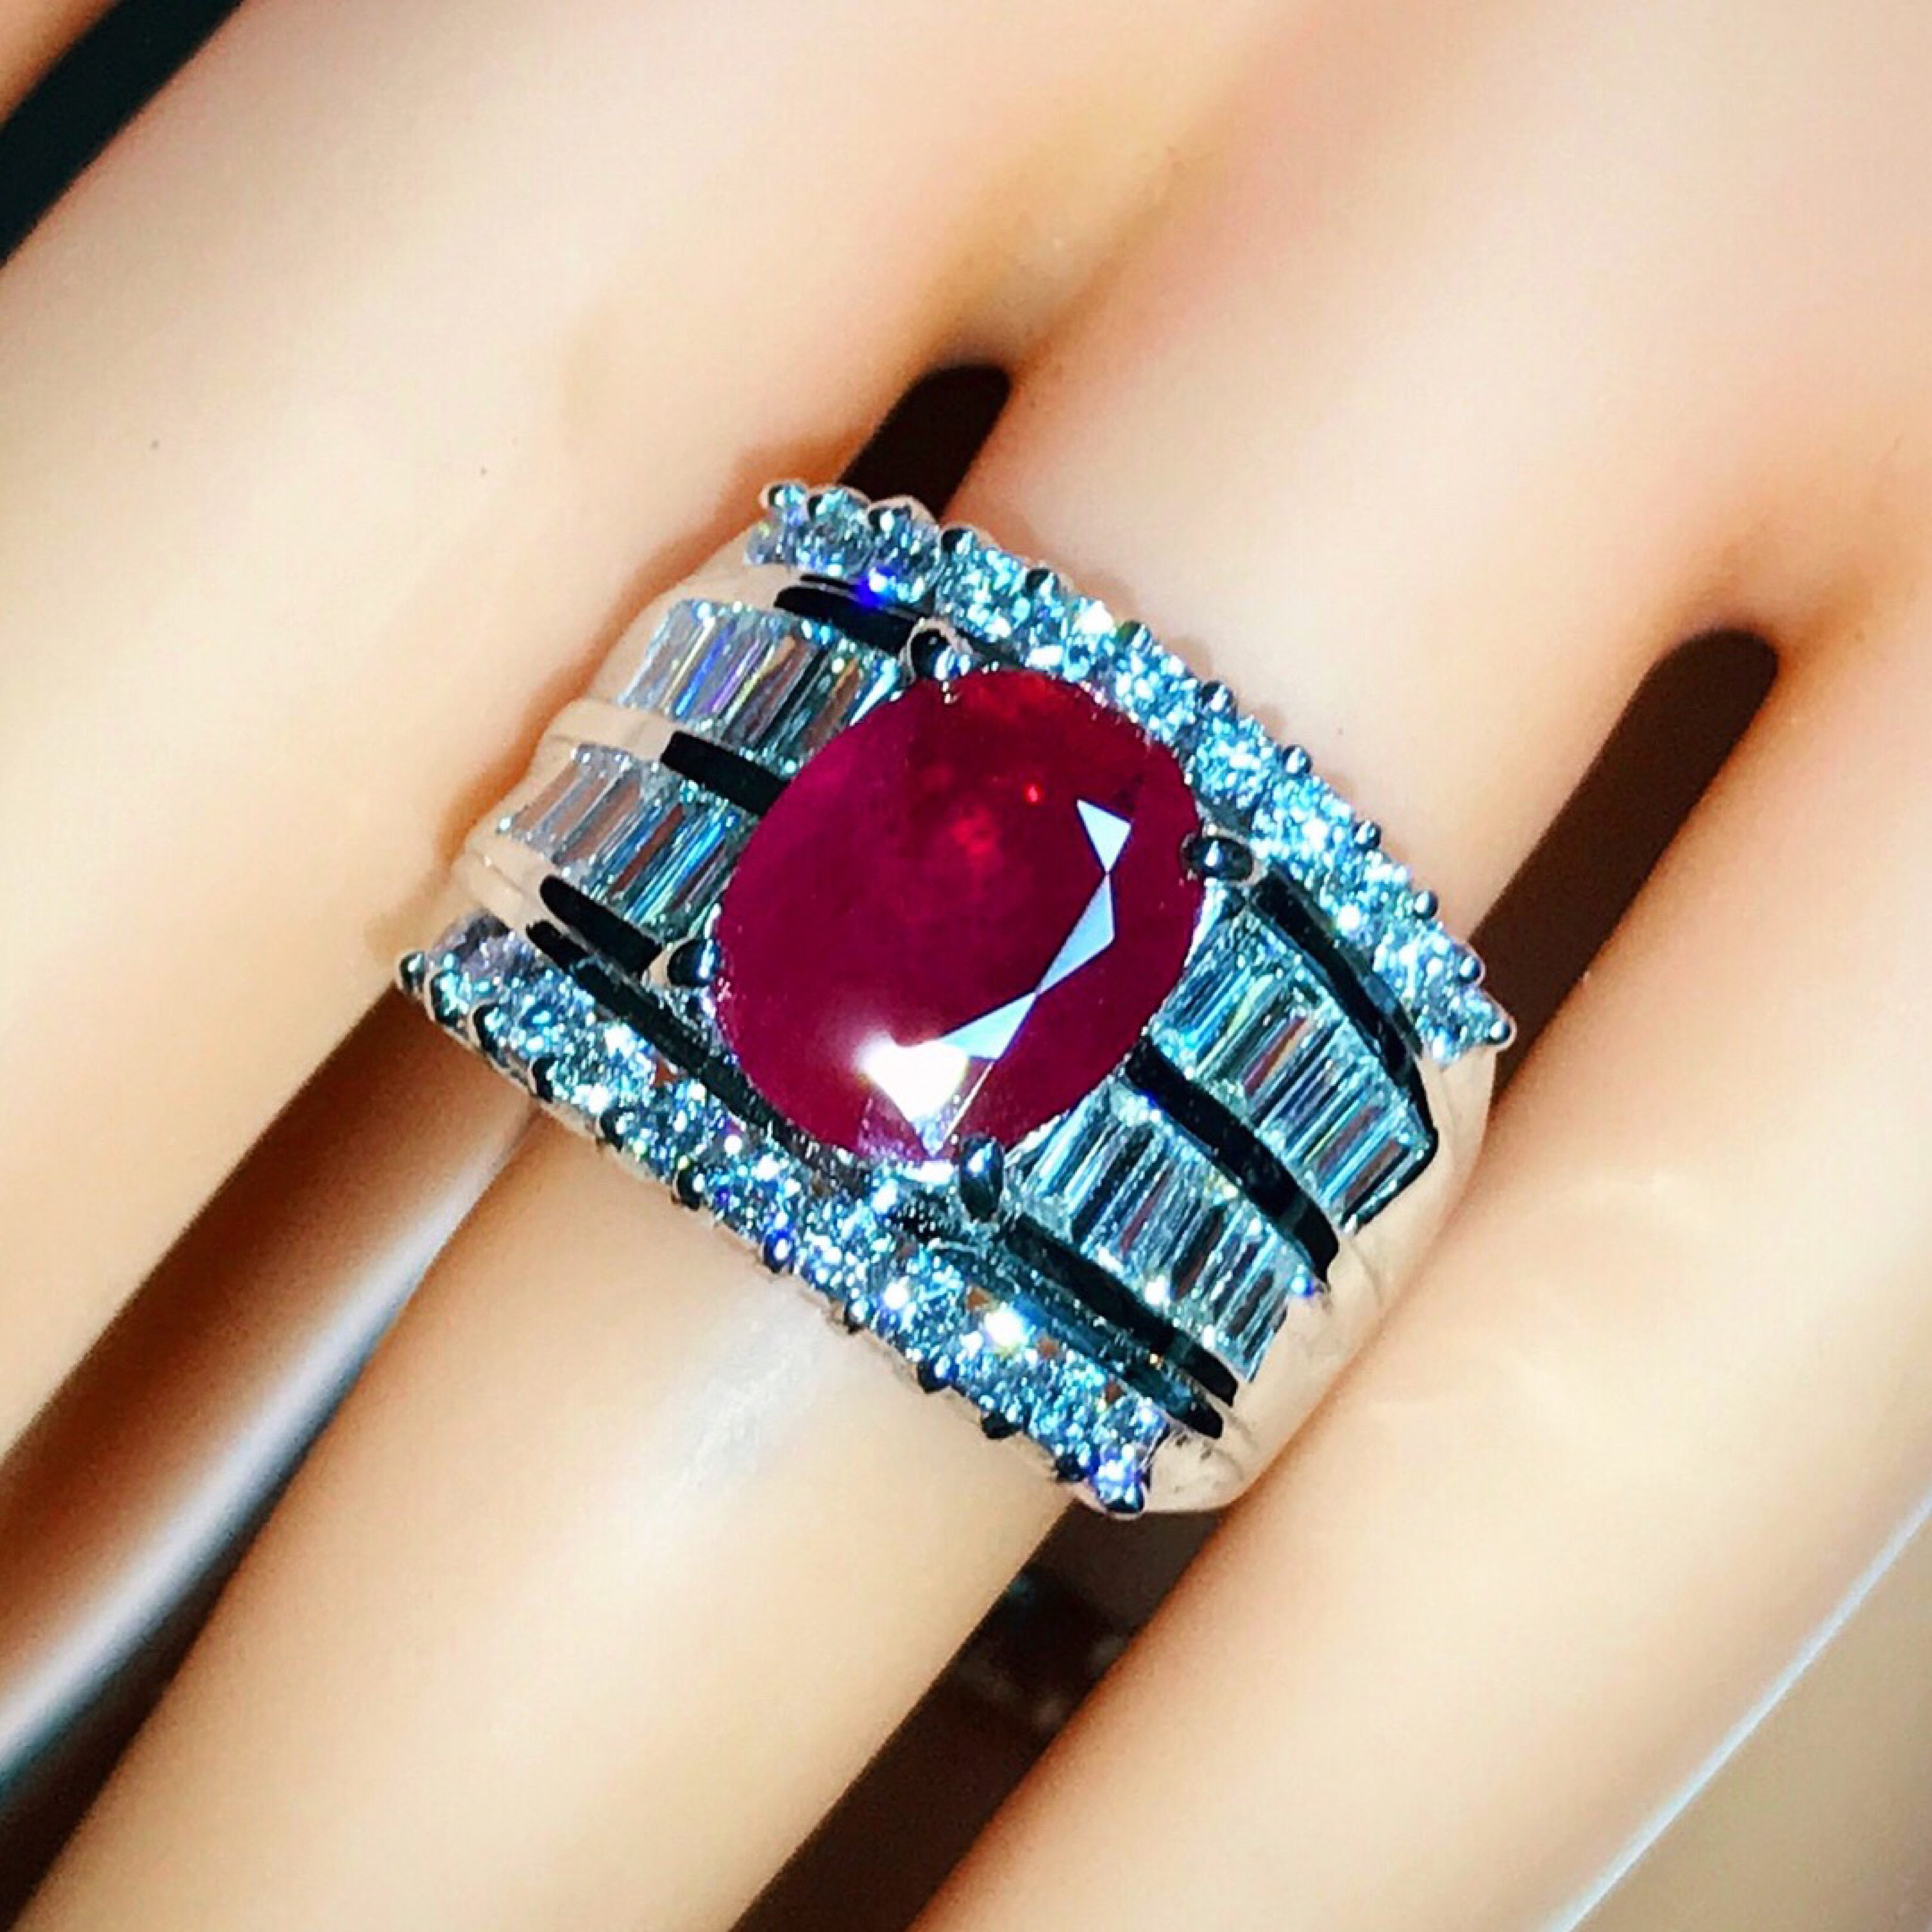 BURMESE 4.12TCW Natural Ruby & Diamonds in 18K solid white gold ring handmade engagement BURMA certified